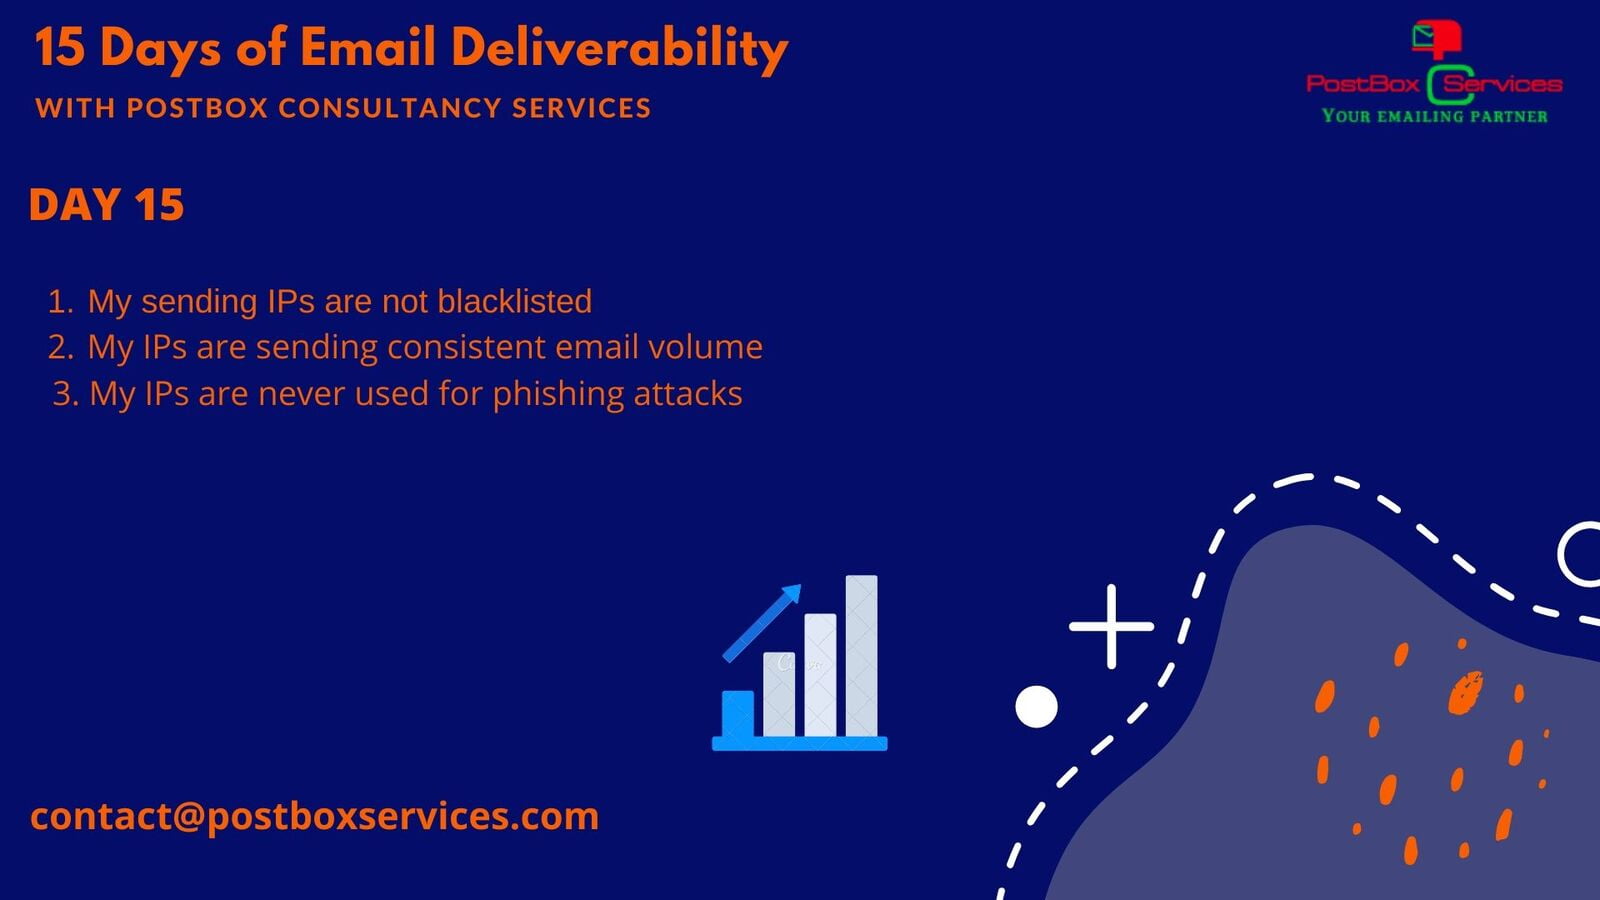 Day 15 Email Deliverability